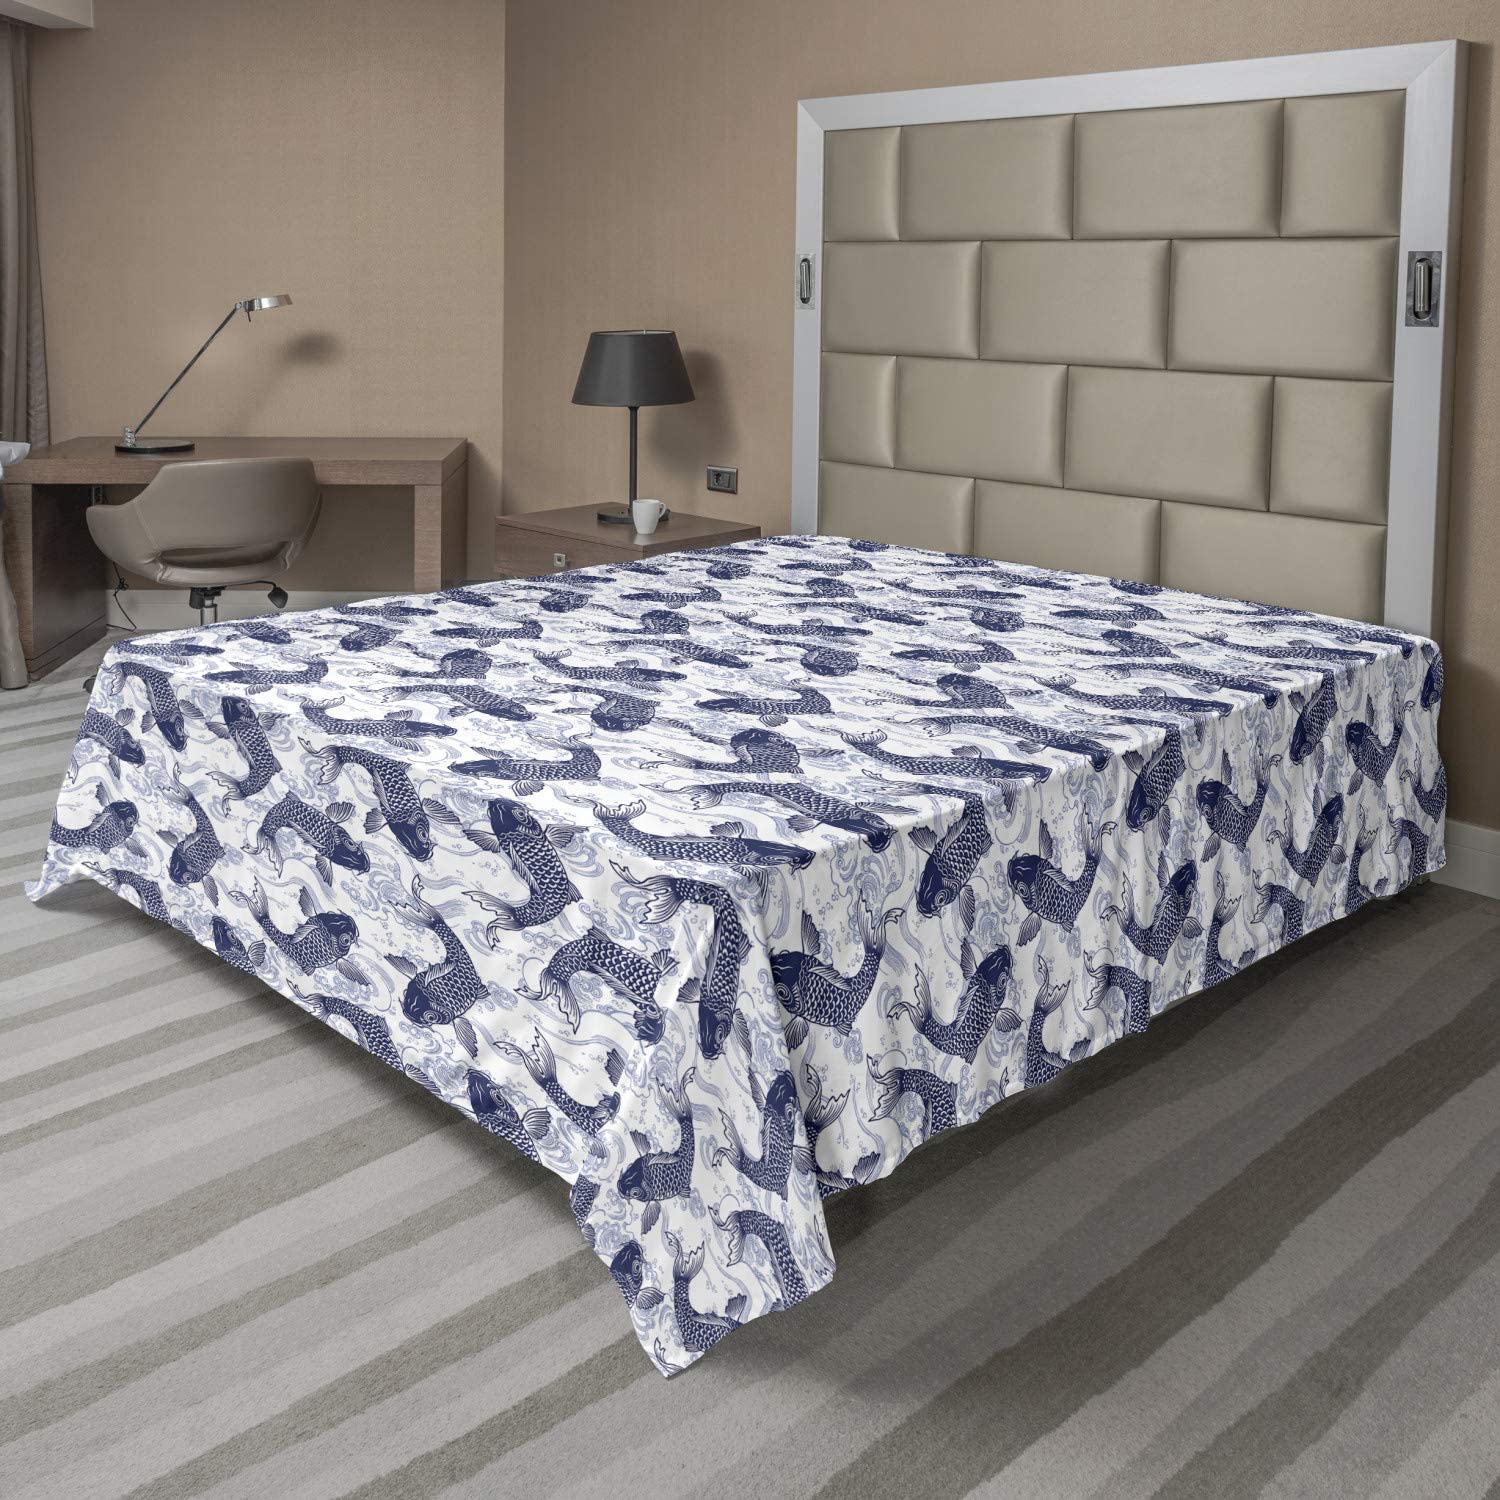 Continuous Pattern with Inspired Blue Tones Orient Details about   Ambesonne Paisley Flat Sheet 